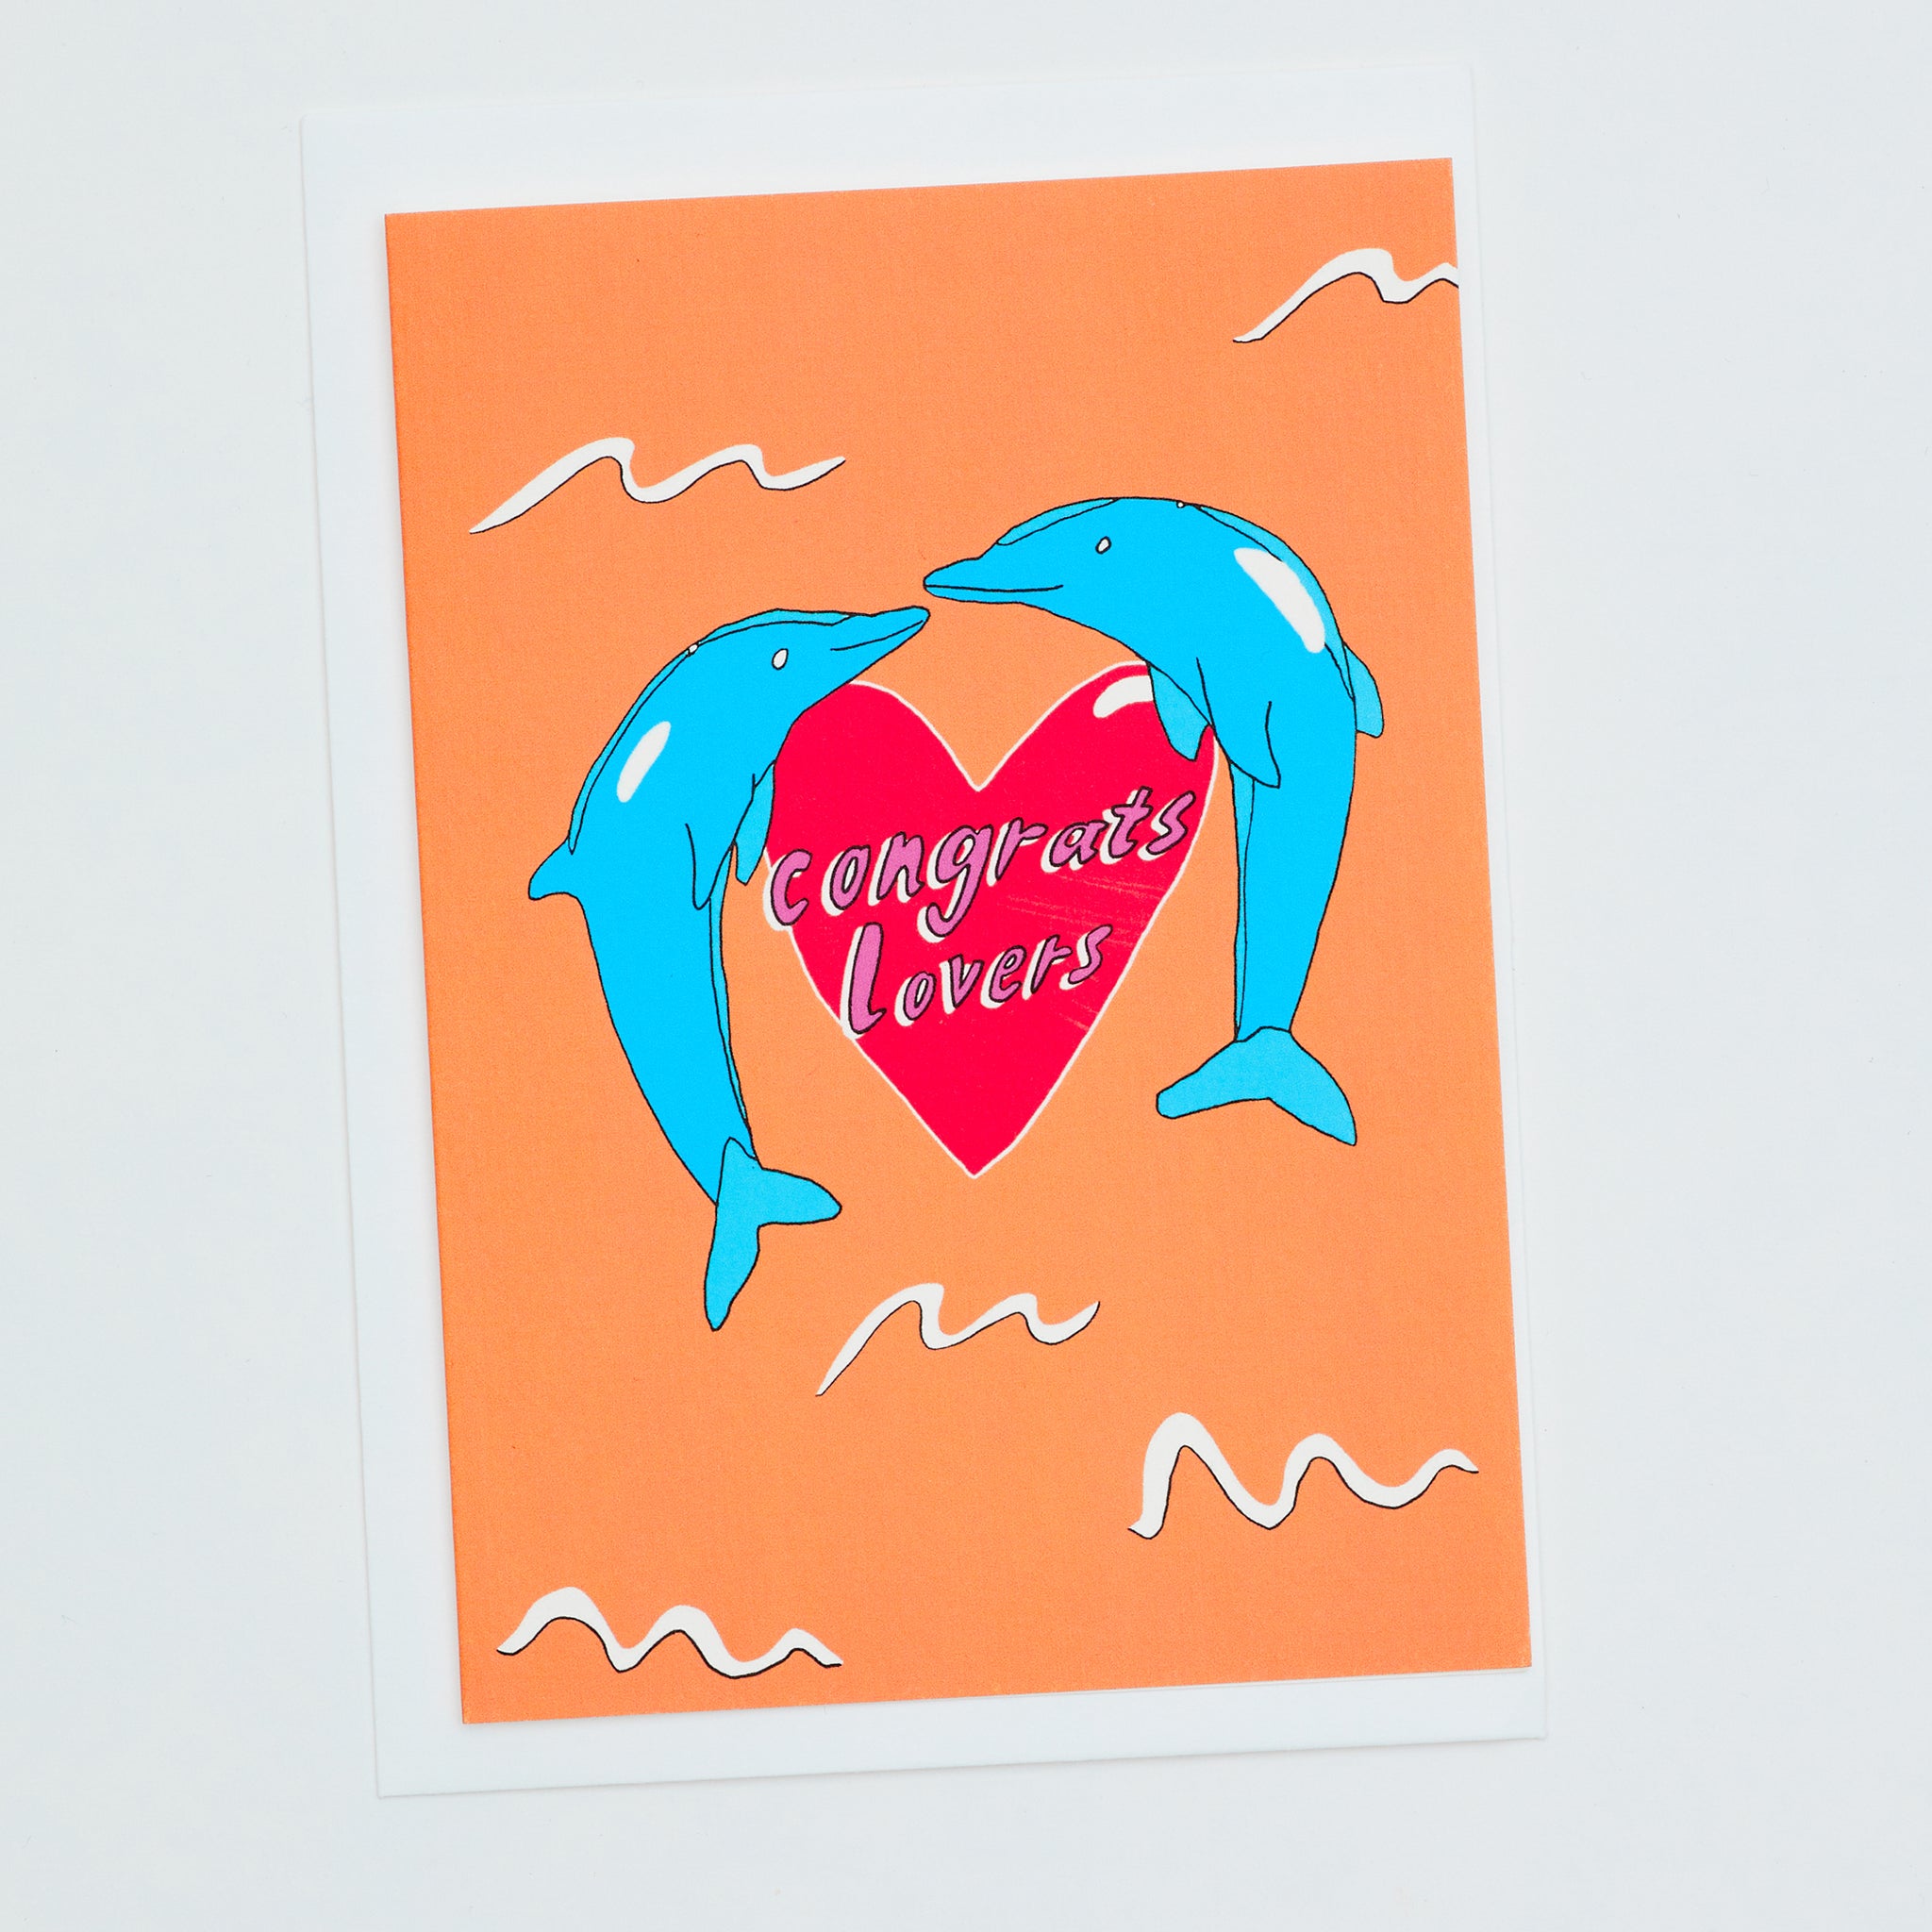 Congrats lovers | Australian made greeting card for weddings, engagements, celebrations of love